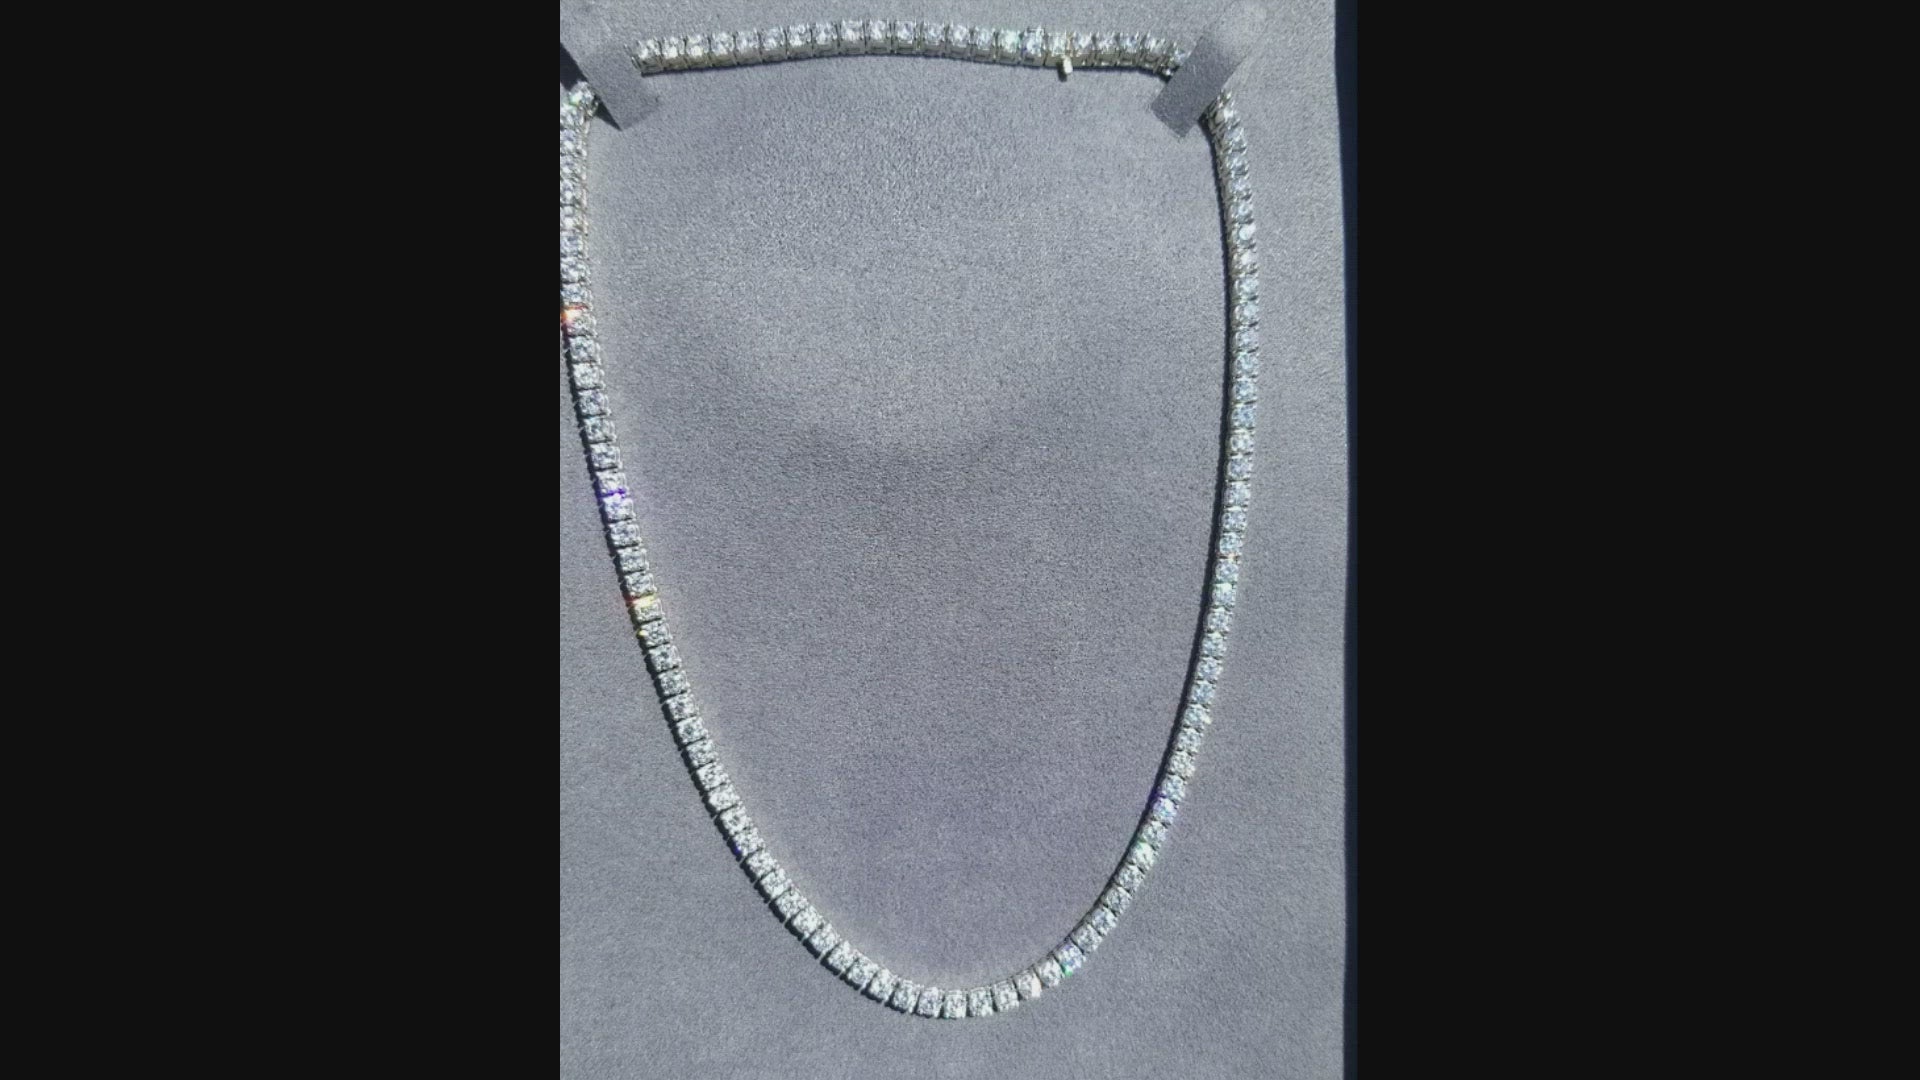 15CT Round Cut Lab-Created Diamond Tennis Necklace 14K White Gold Plated  Silver | eBay